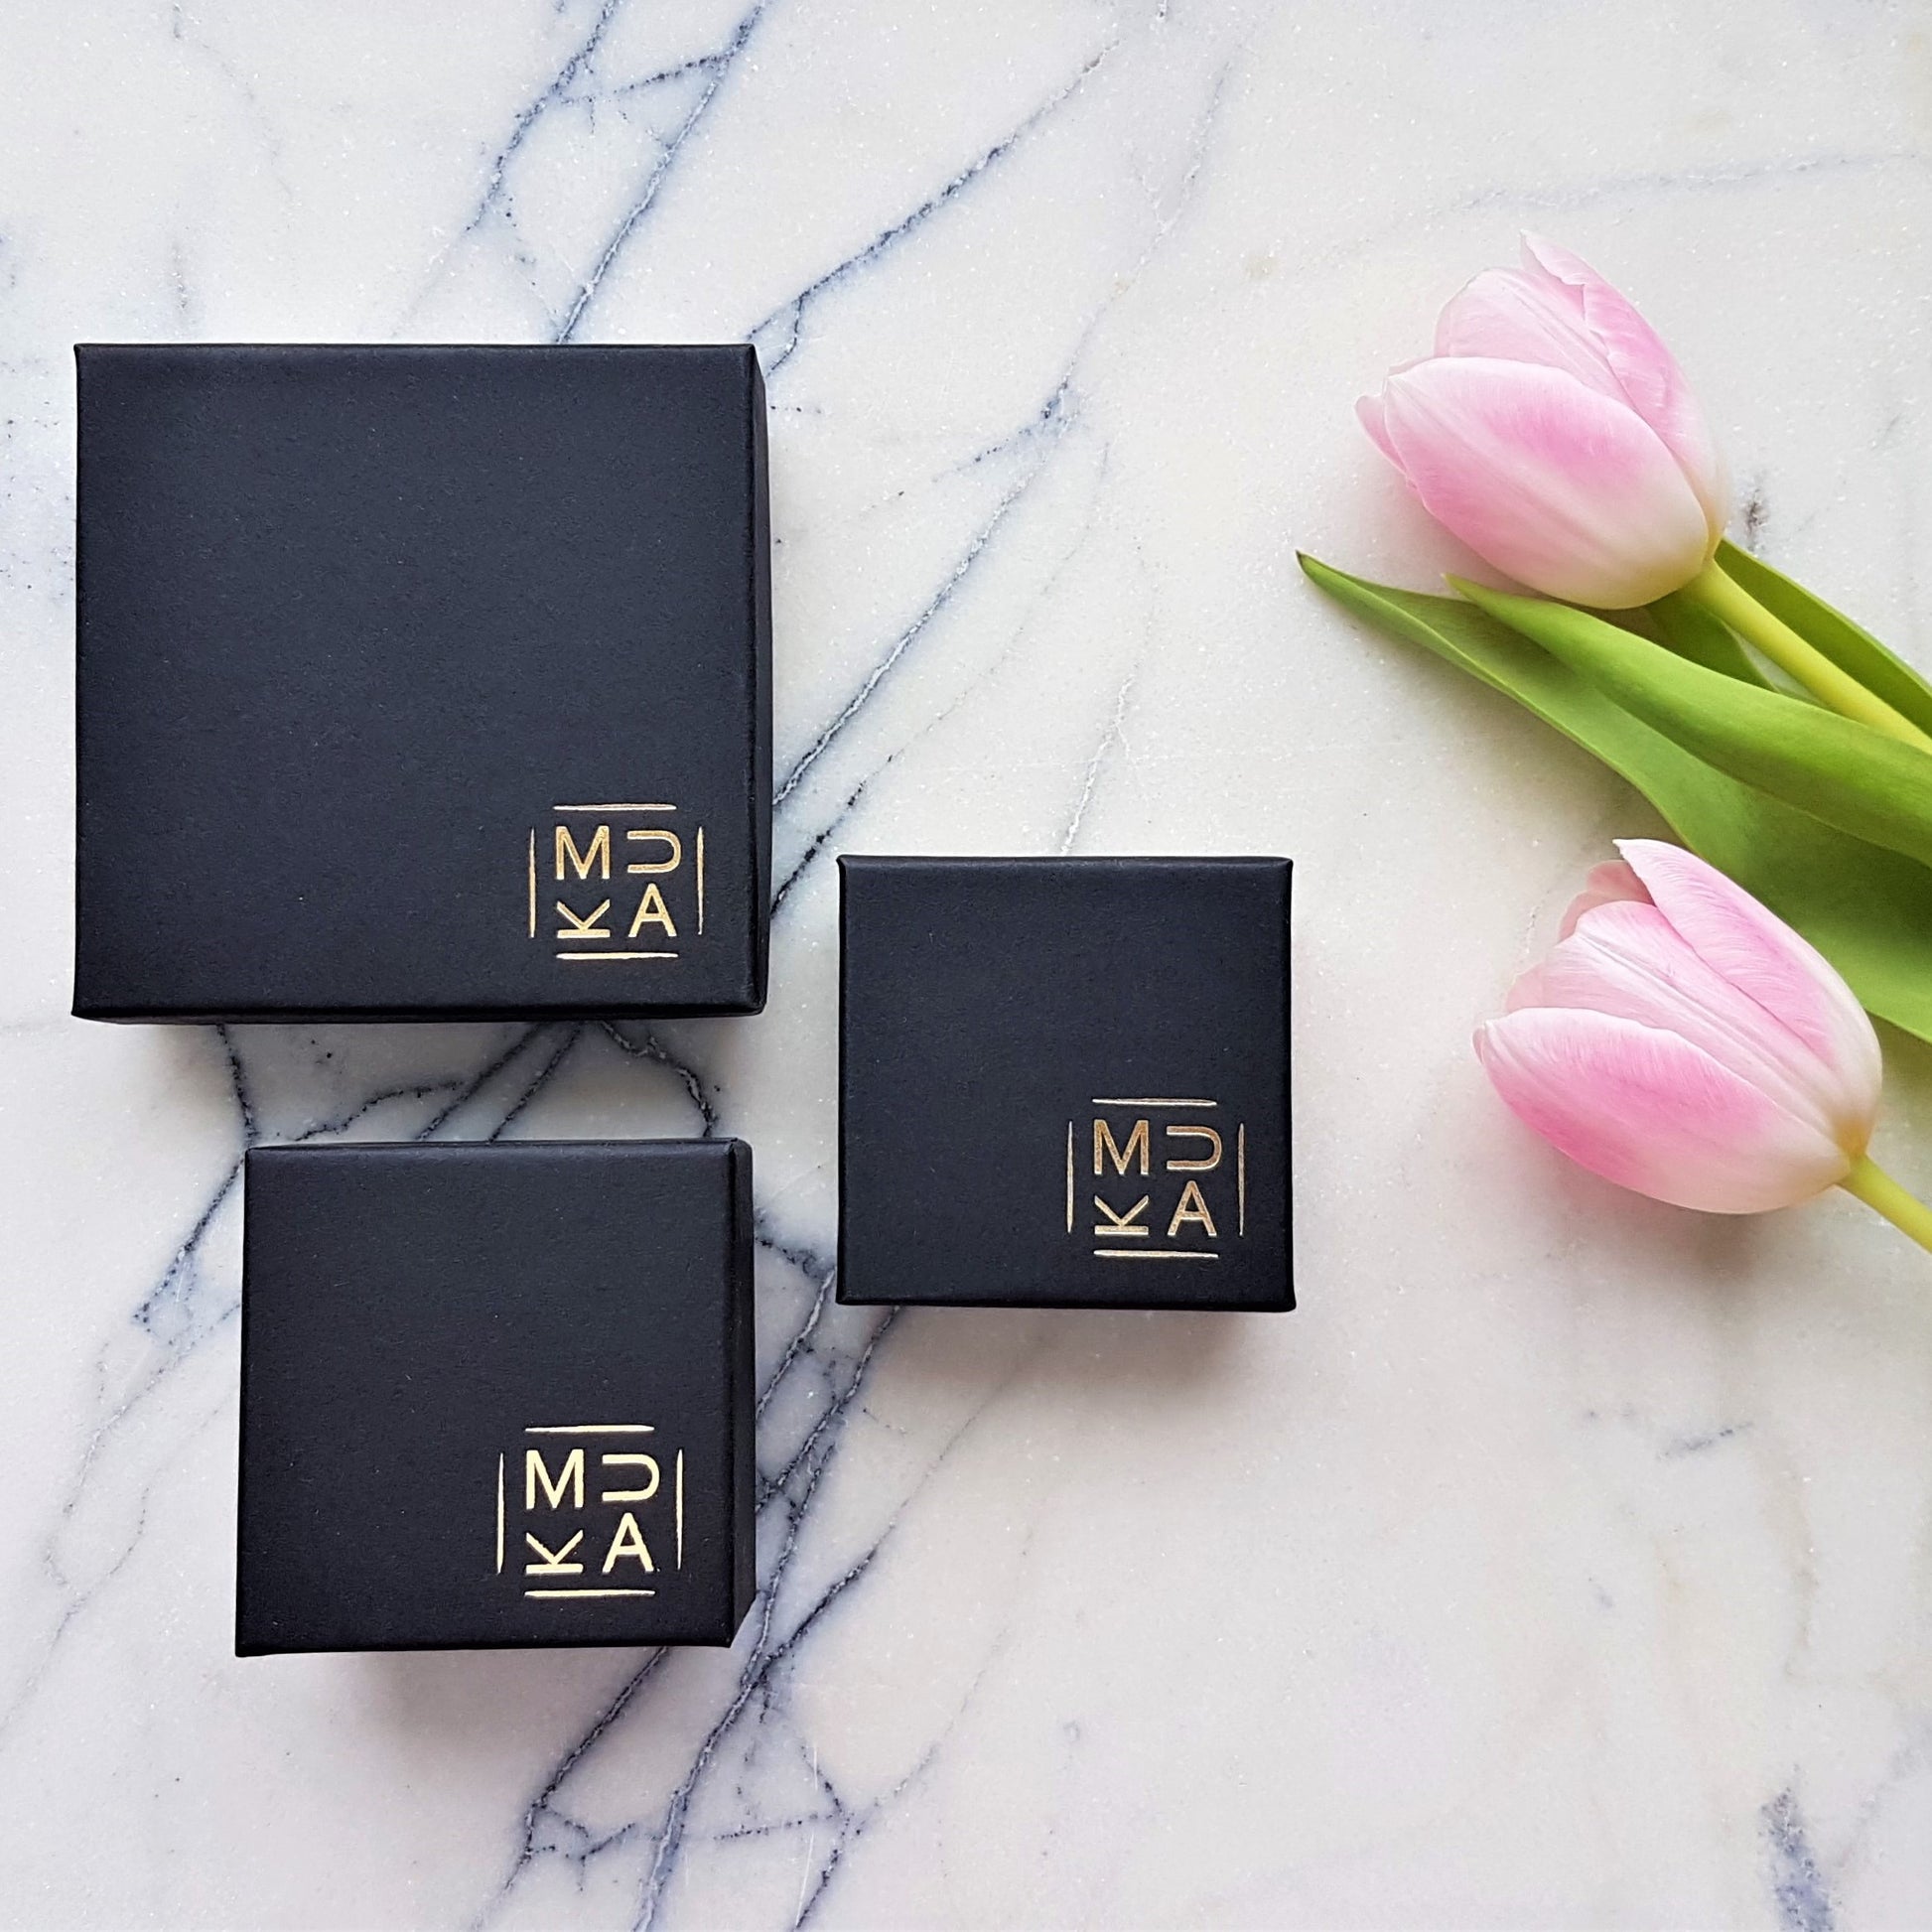 MUKA studio jewellery boxes, black box with gold logo pictured next to tulip flowers